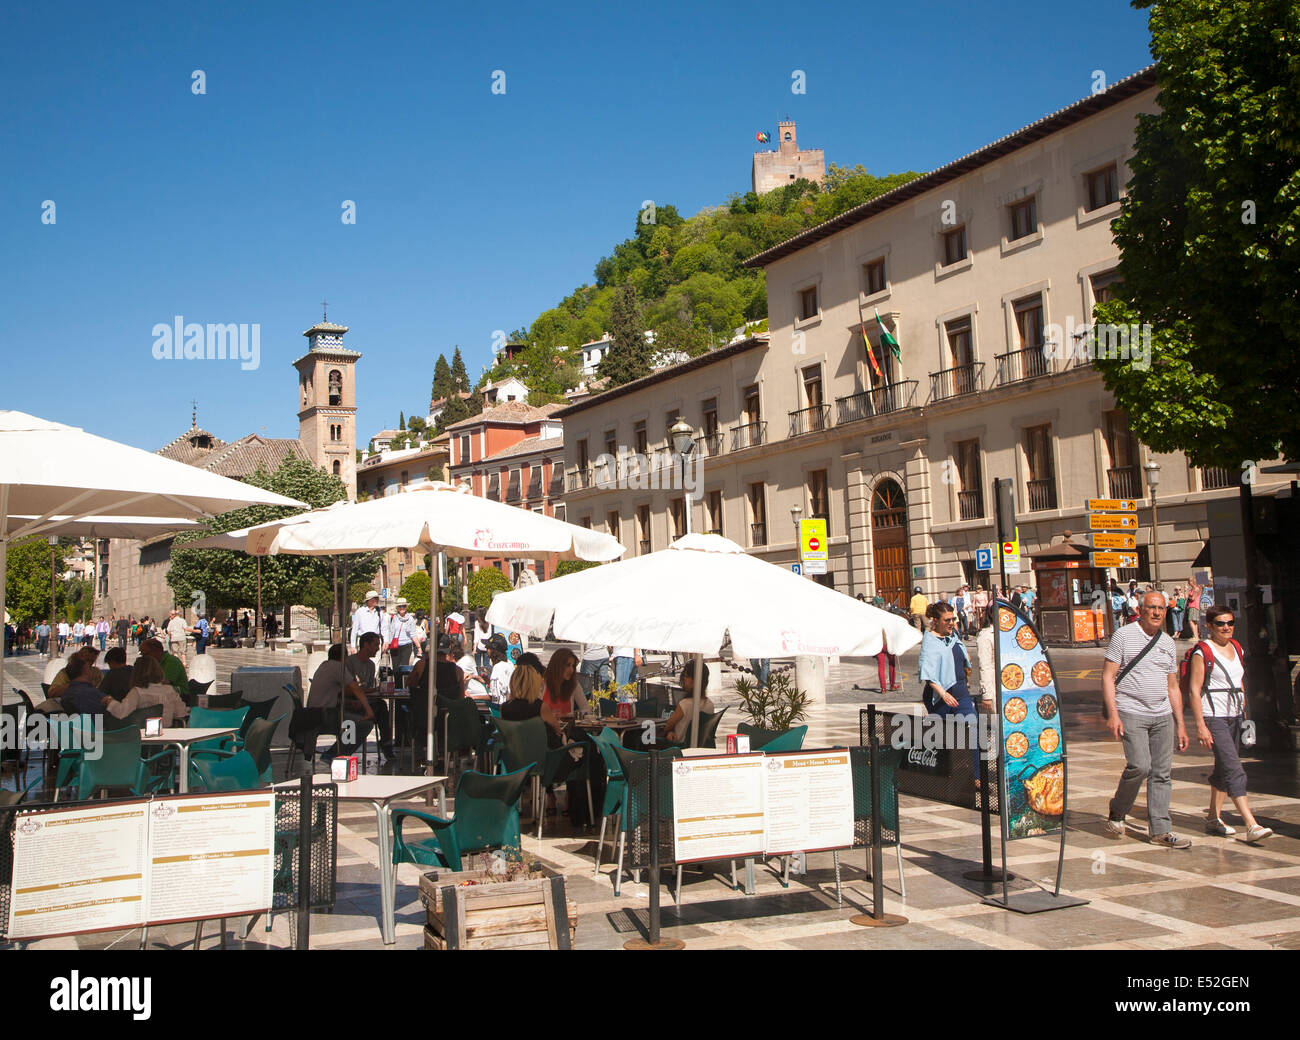 People in tourist cafe in Plaza Nueva, Granada, Spain looking up at part of the Alhambra on a hill top. Stock Photo